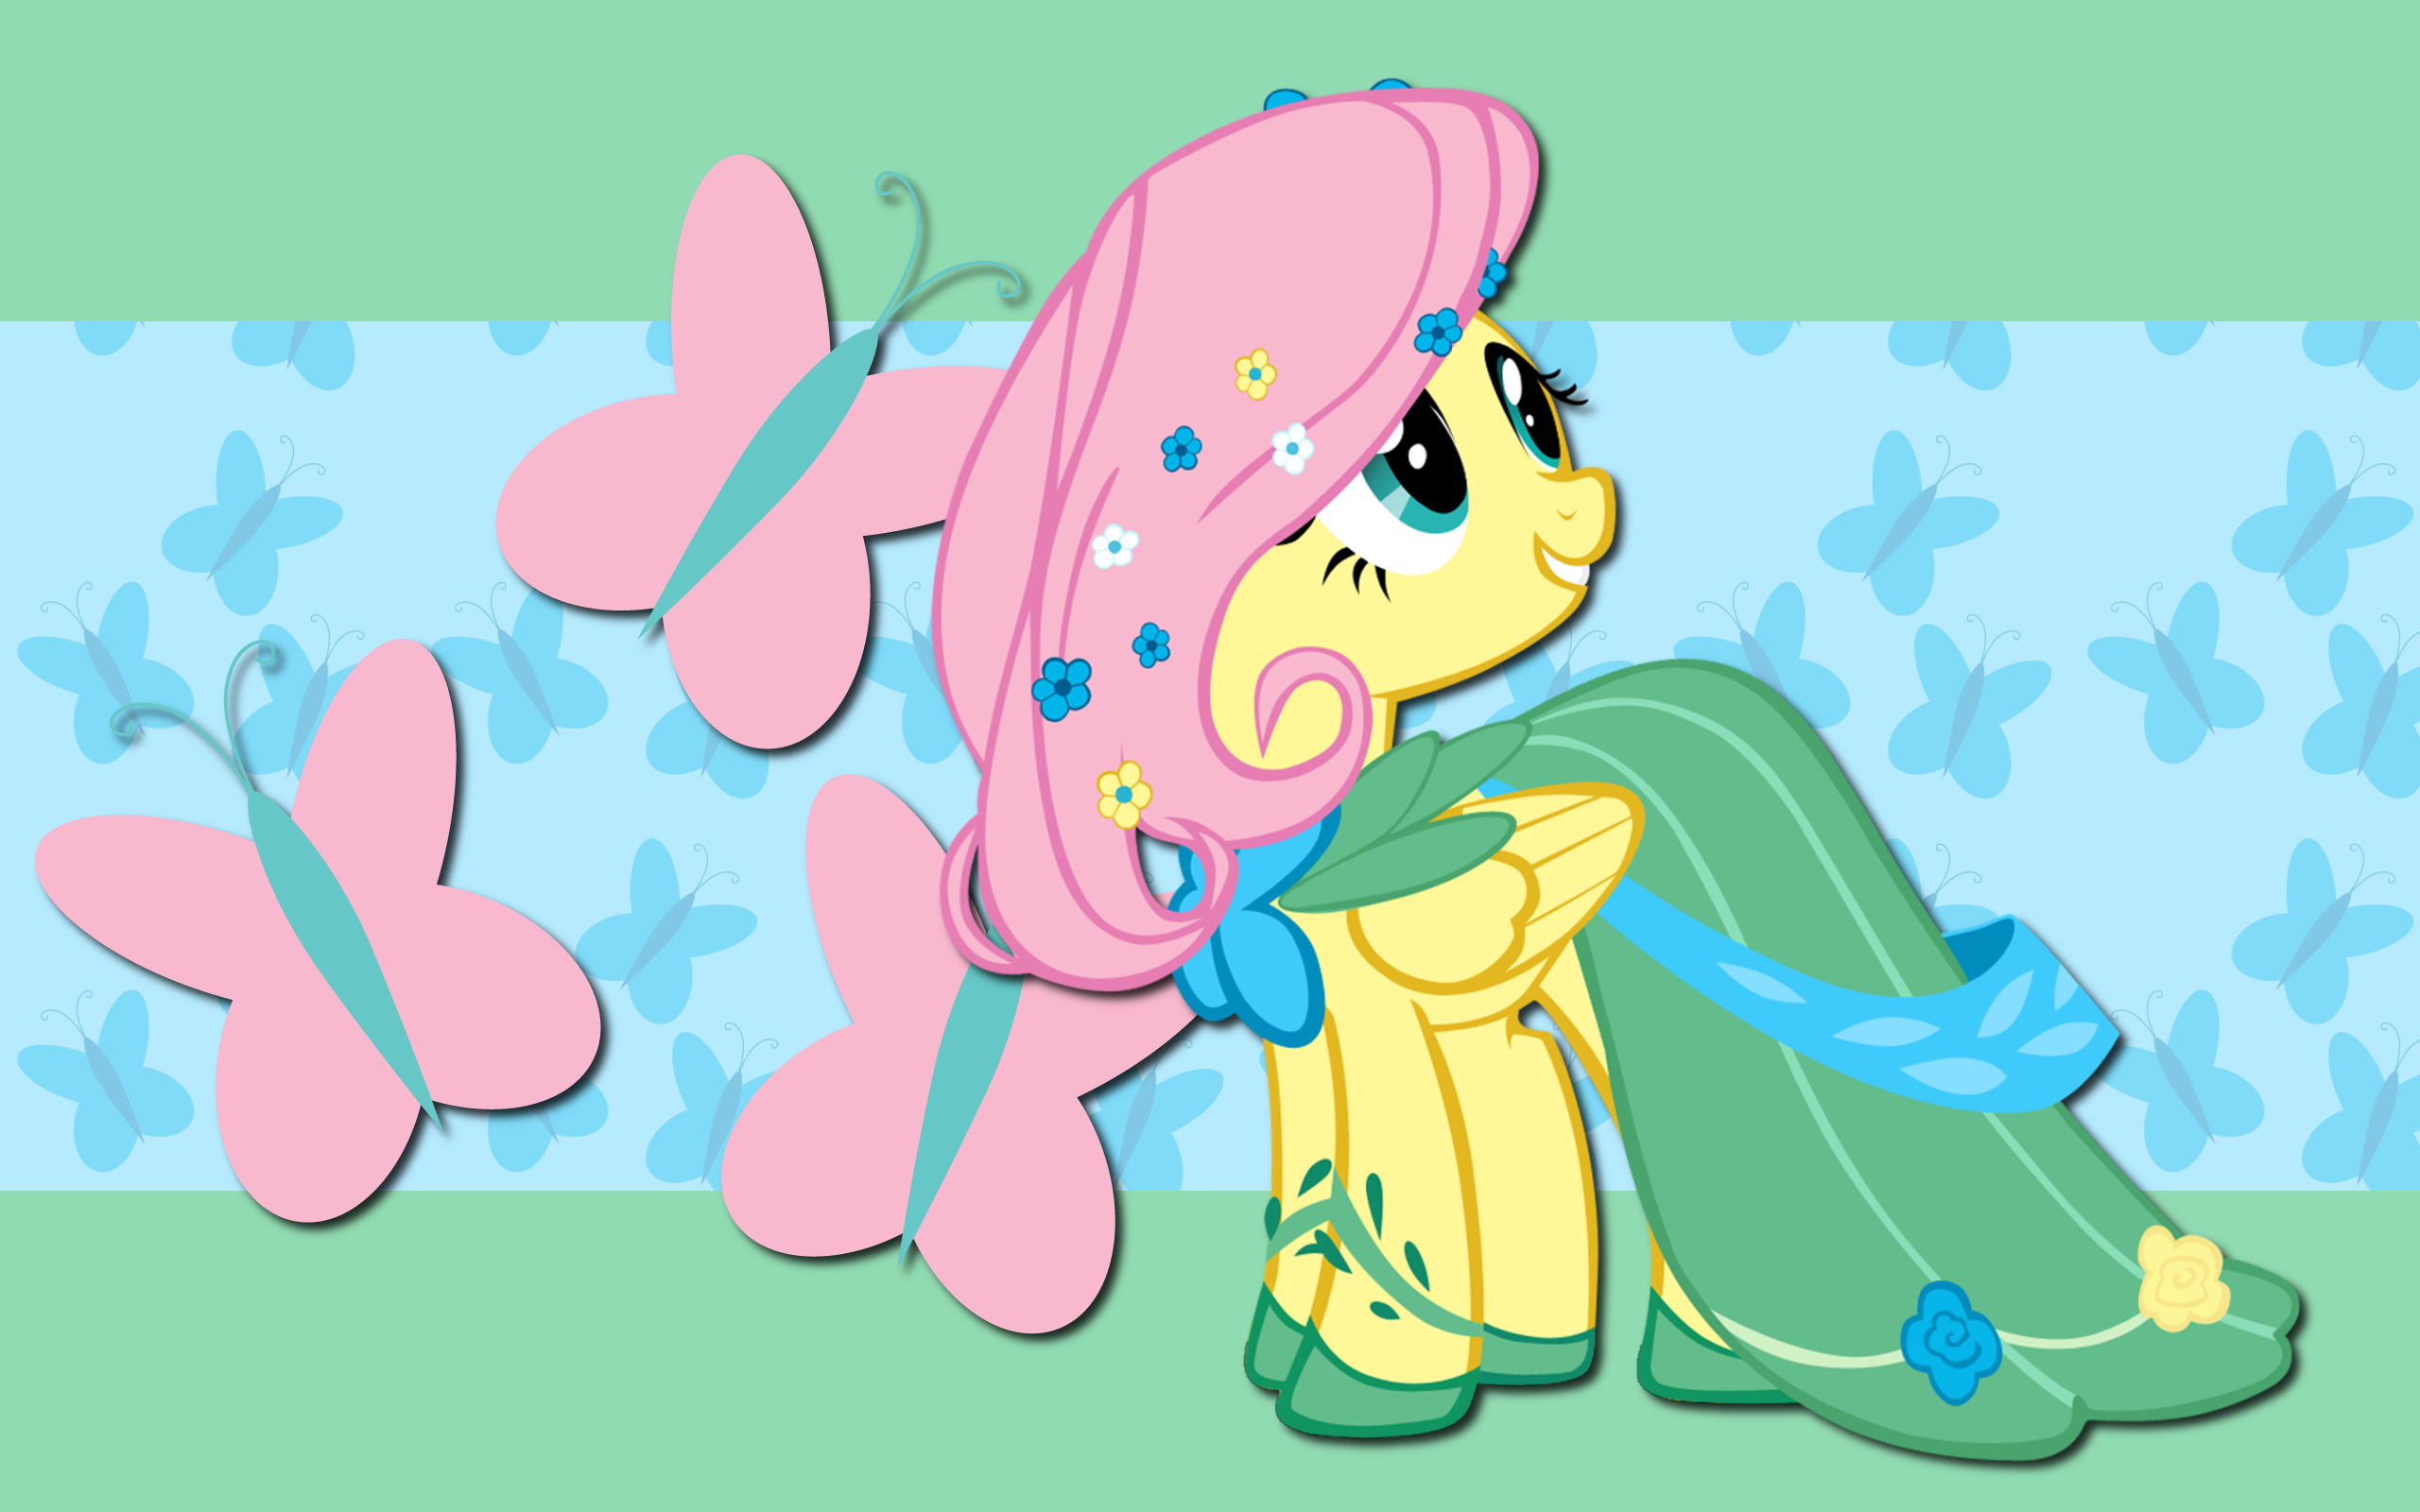 Gala Fluttershy WP by AliceHumanSacrifice0, ooklah and Takua770